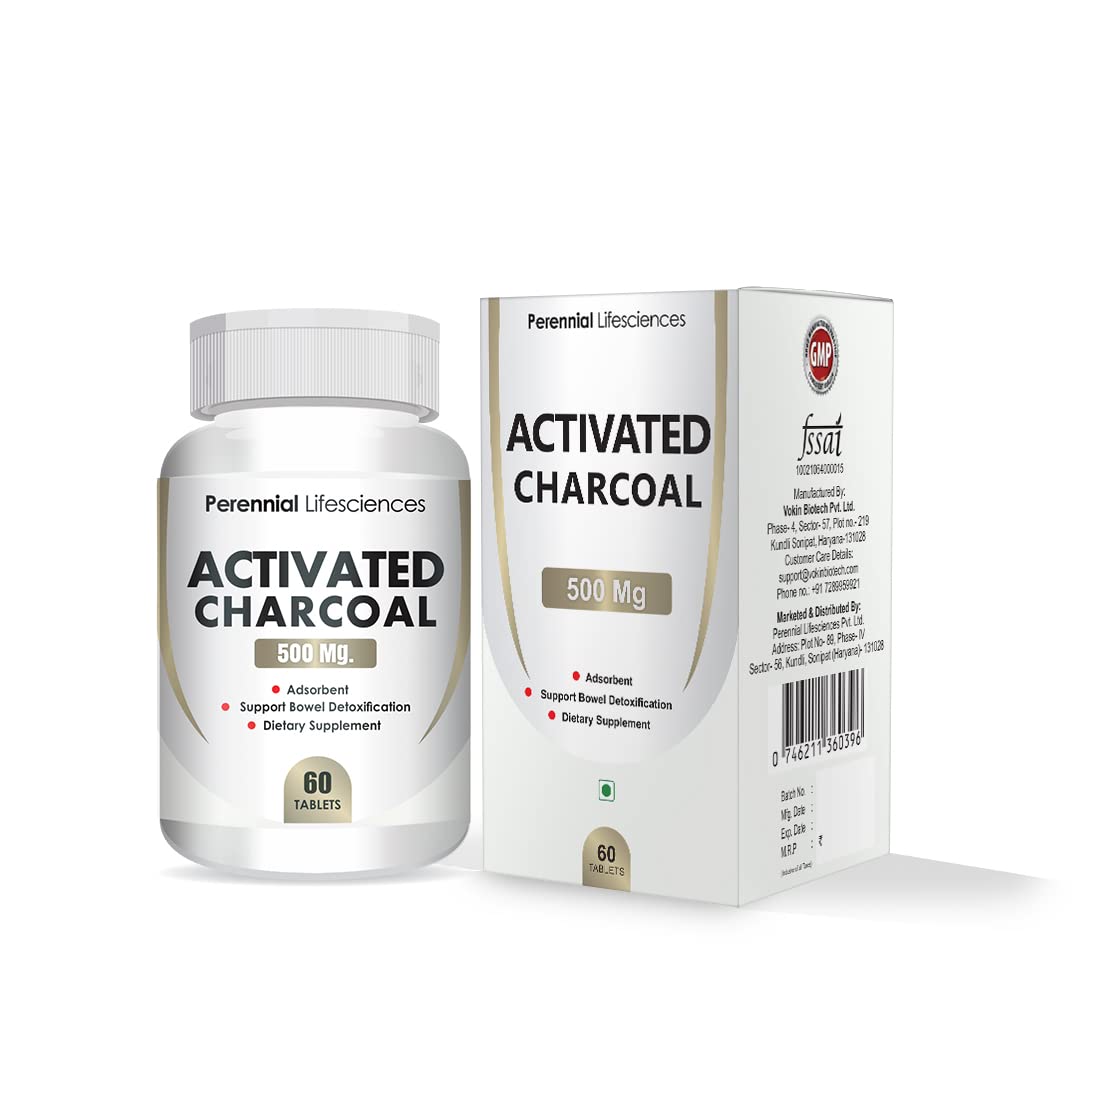 Perennial Lifesciences Activated Charcoal Image